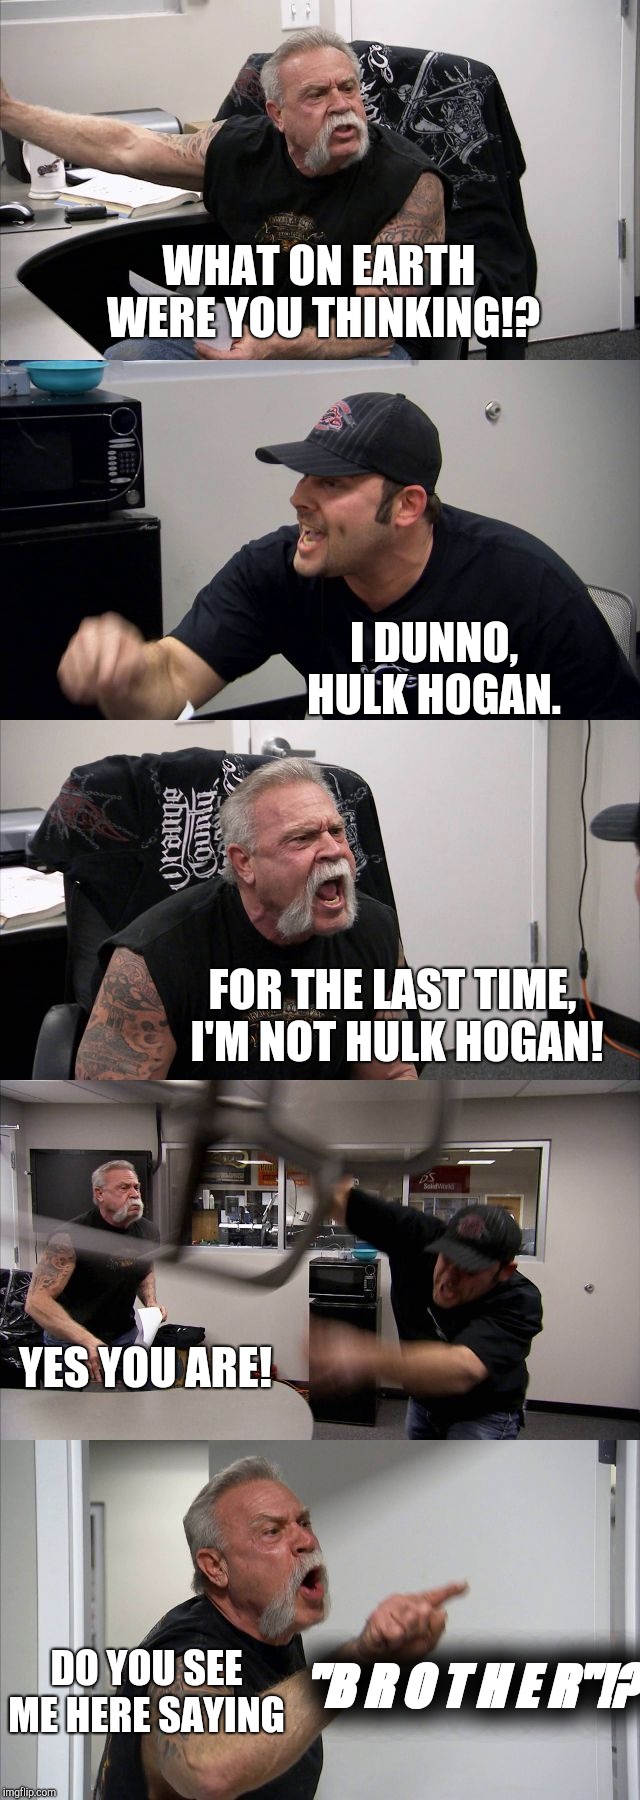 American Chopper Argument Meme | WHAT ON EARTH WERE YOU THINKING!? I DUNNO, HULK HOGAN. FOR THE LAST TIME, I'M NOT HULK HOGAN! YES YOU ARE! "B R O T H E R"!? DO YOU SEE ME HERE SAYING | image tagged in memes,american chopper argument | made w/ Imgflip meme maker